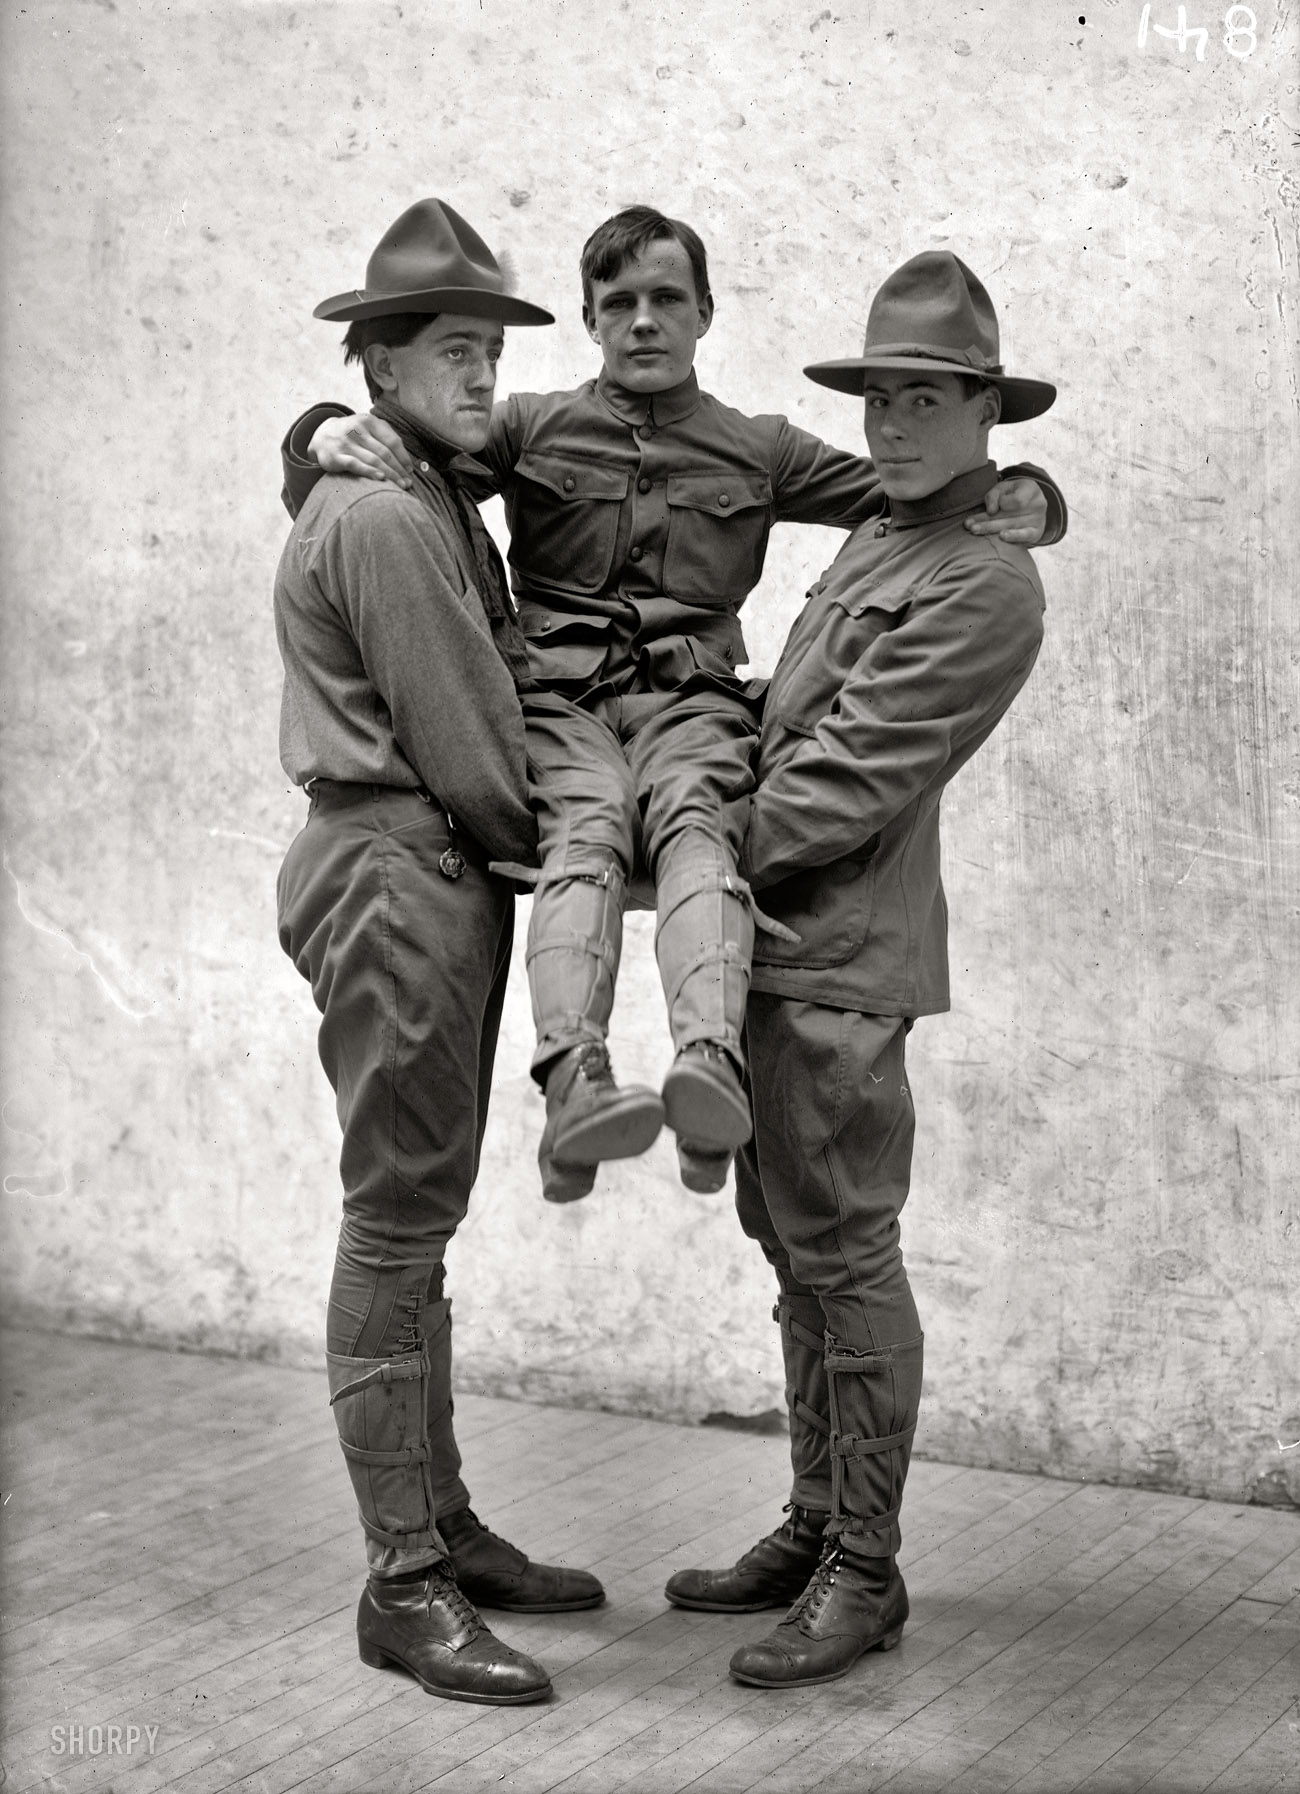 "Boy Scout Training demonstration, 1912." Yes, they're back. I found a few more of these oddly poignant portraits of Scouting first aid to the injured. Harris & Ewing Collection glass negative. View full size.